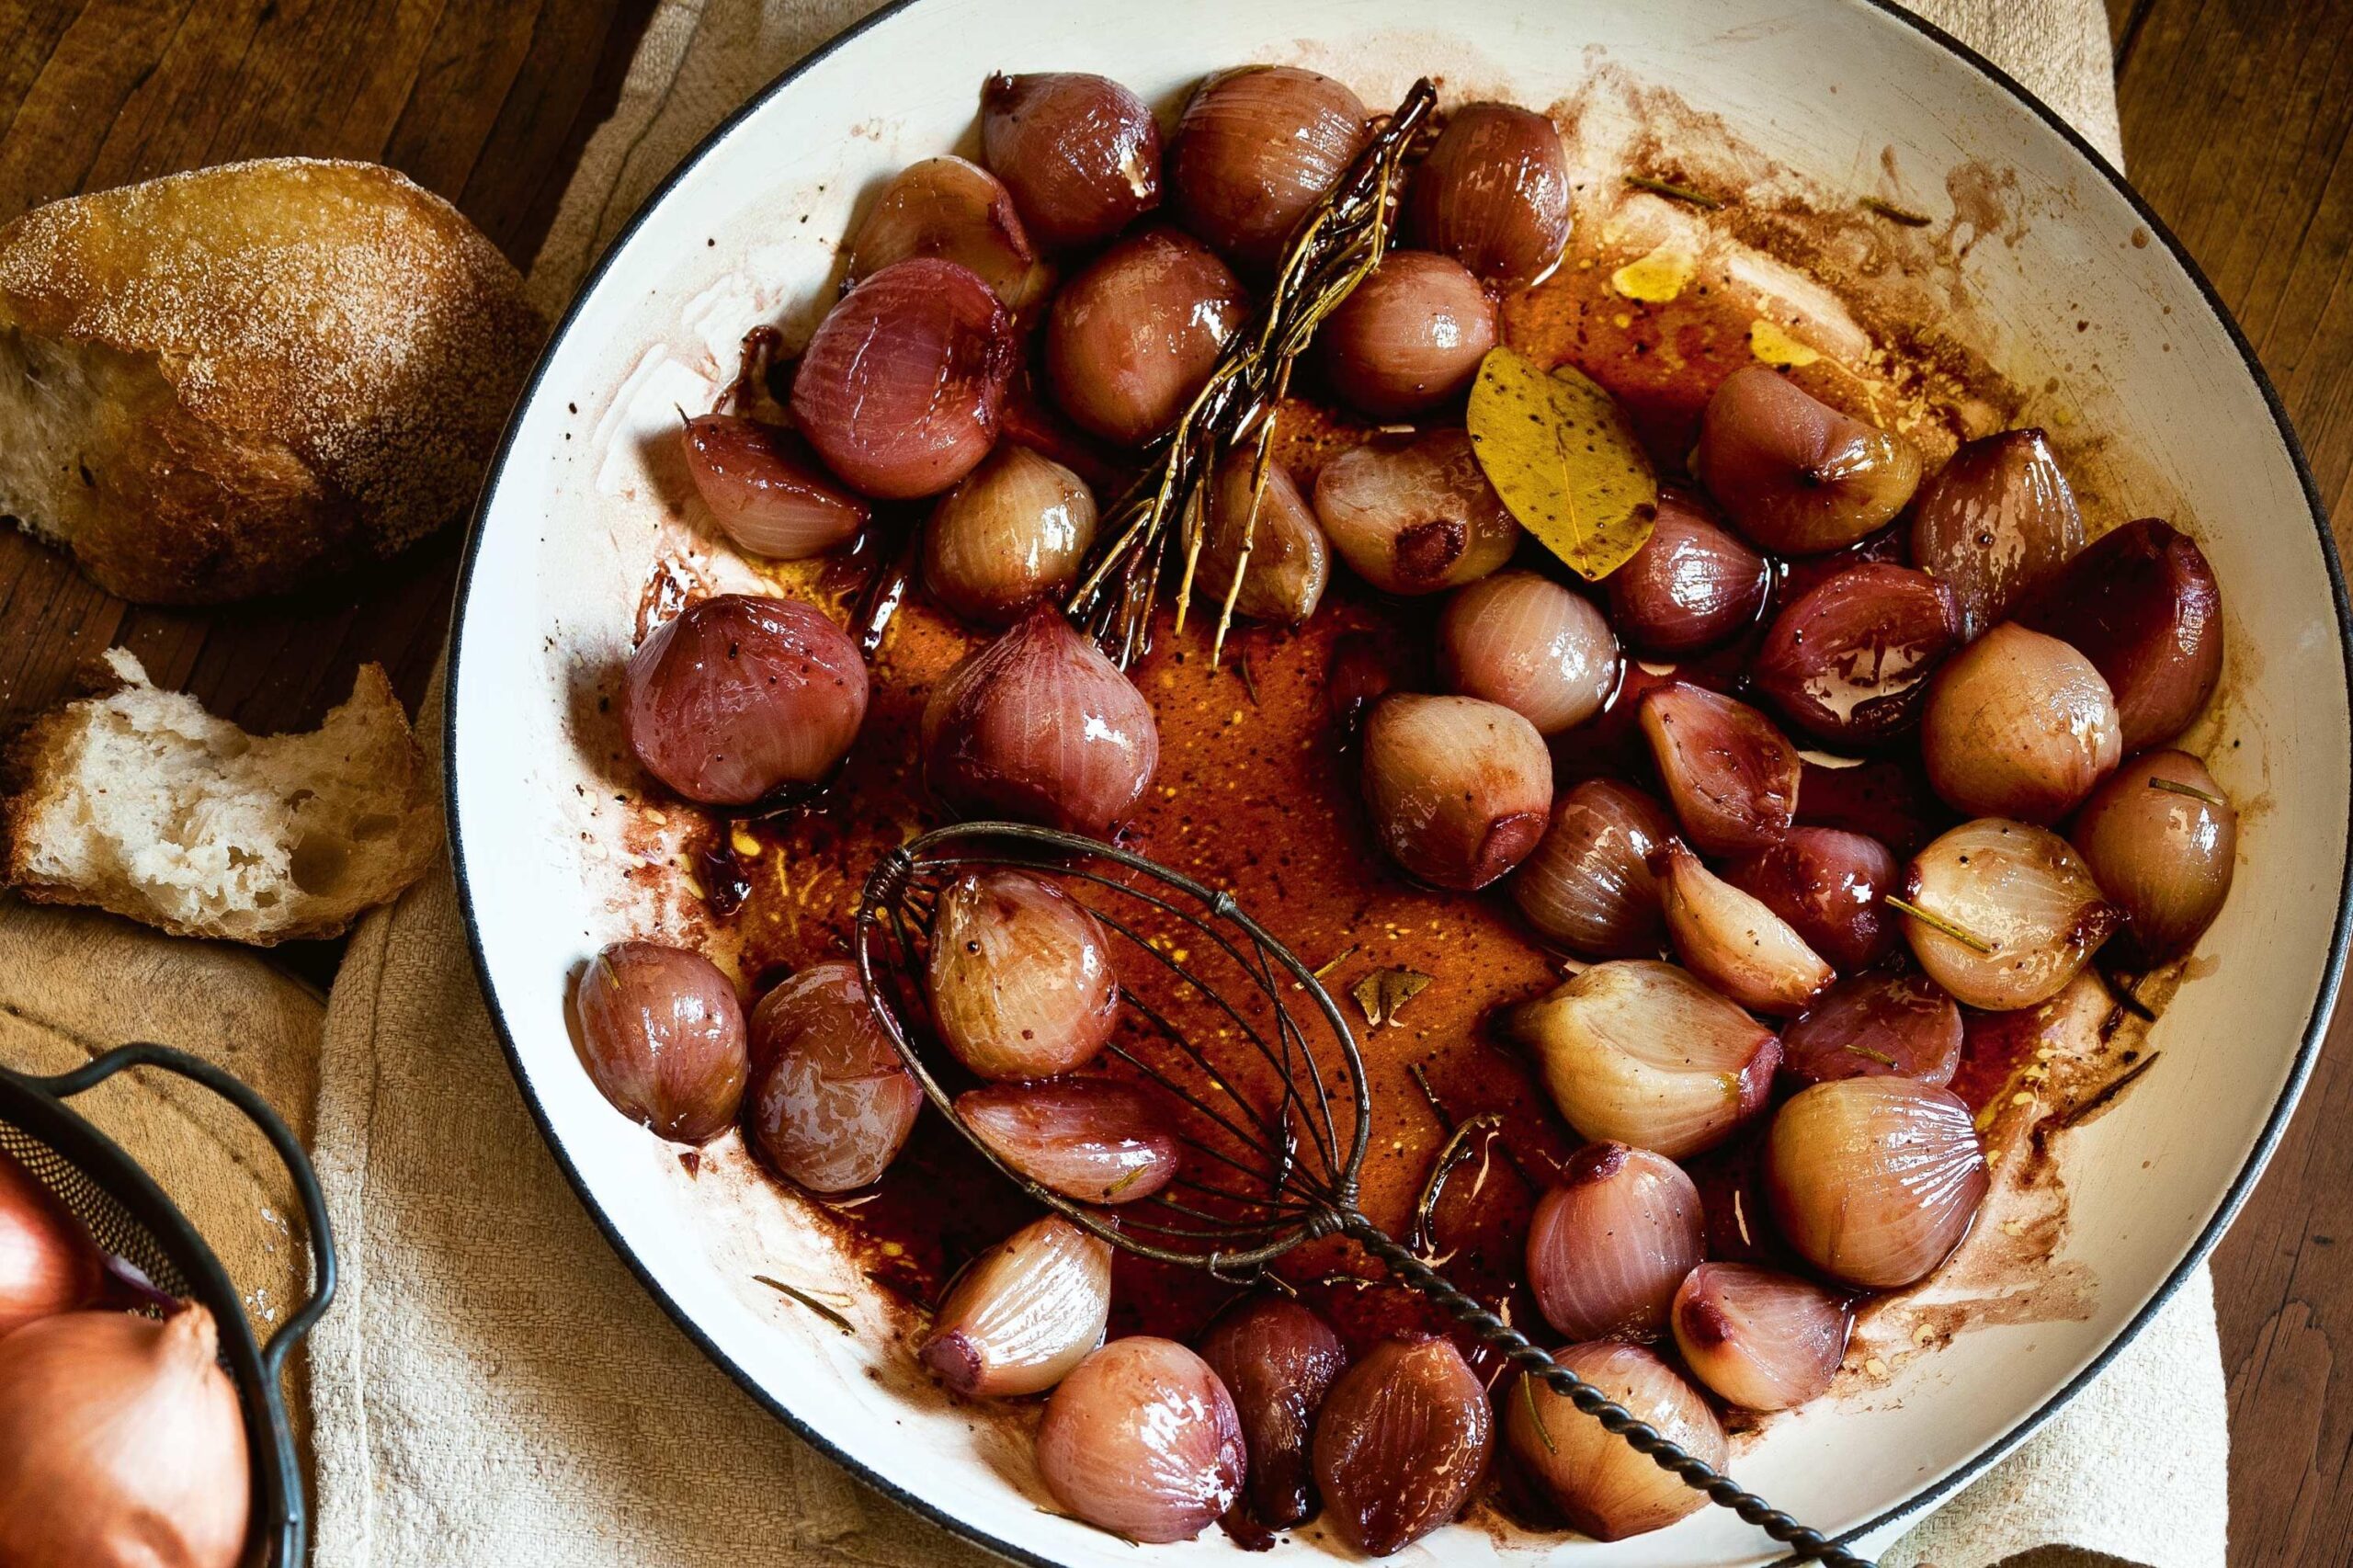  The deep, complex flavors of the red wine and shallots make this sauce fit for a king (or queen).